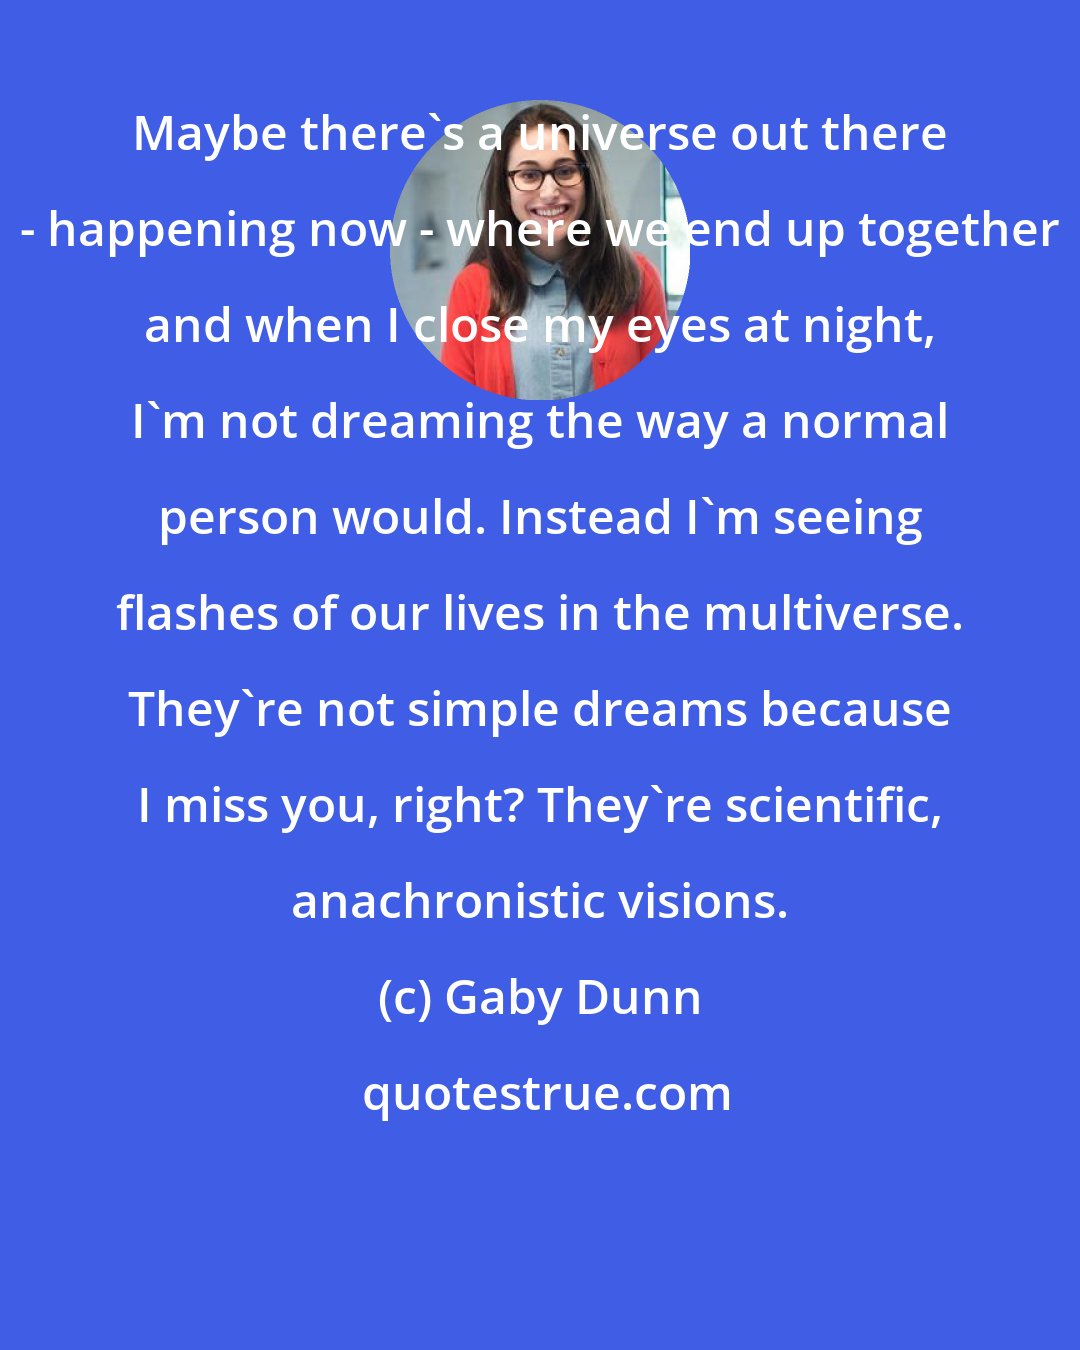 Gaby Dunn: Maybe there's a universe out there - happening now - where we end up together and when I close my eyes at night, I'm not dreaming the way a normal person would. Instead I'm seeing flashes of our lives in the multiverse. They're not simple dreams because I miss you, right? They're scientific, anachronistic visions.